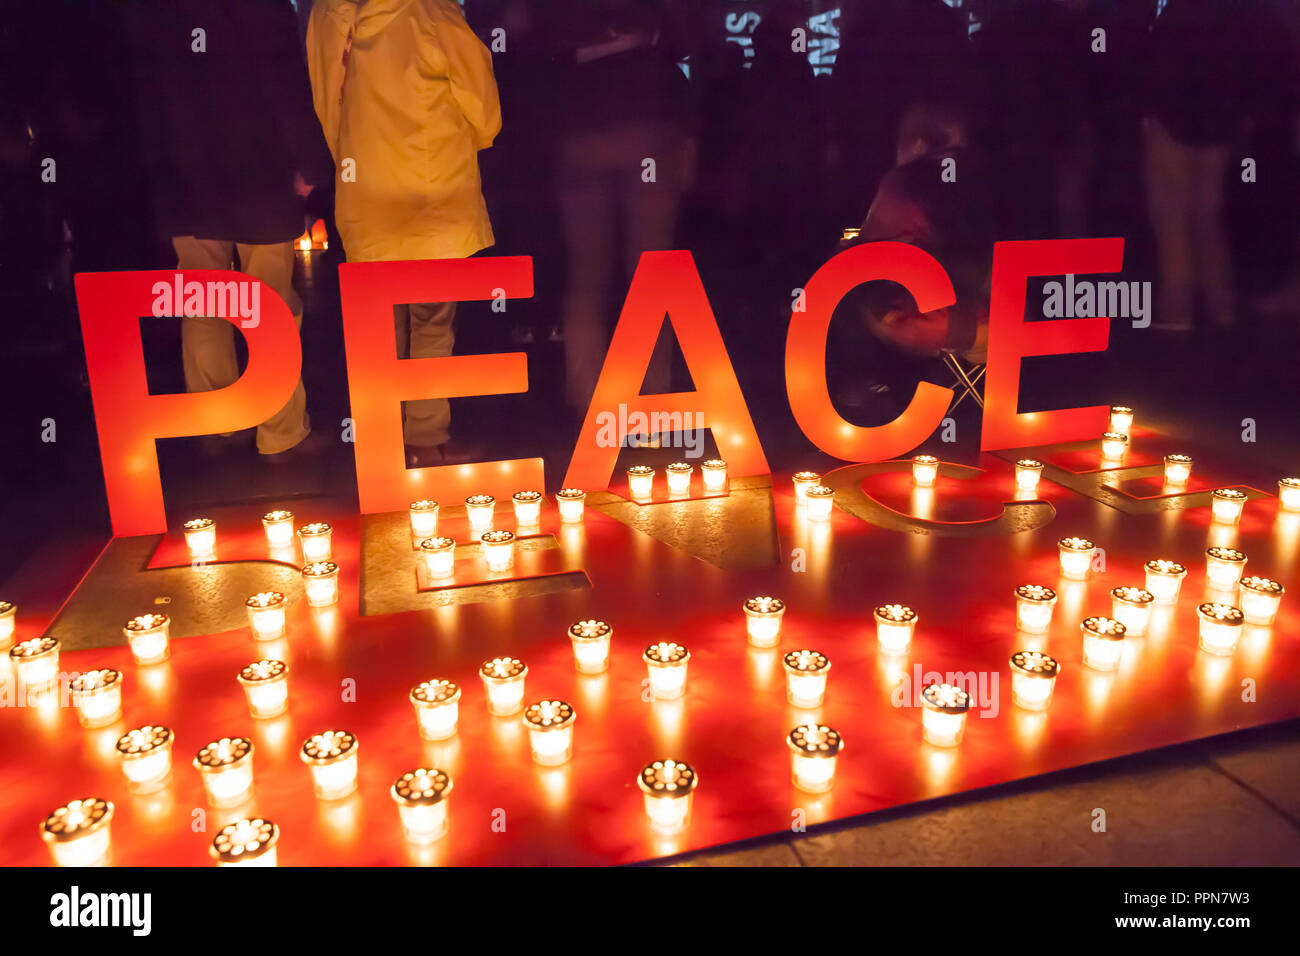 Cologne, Germany, September 26th. 2018. Peace lights in front of word sculptures in front of the cathedral during the cathedral pilgrimage 2018, the sculptures show the word peace in 12 languages, Cologne, Germany. Credit: Joern Sackermann/Alamy Live News Stock Photo